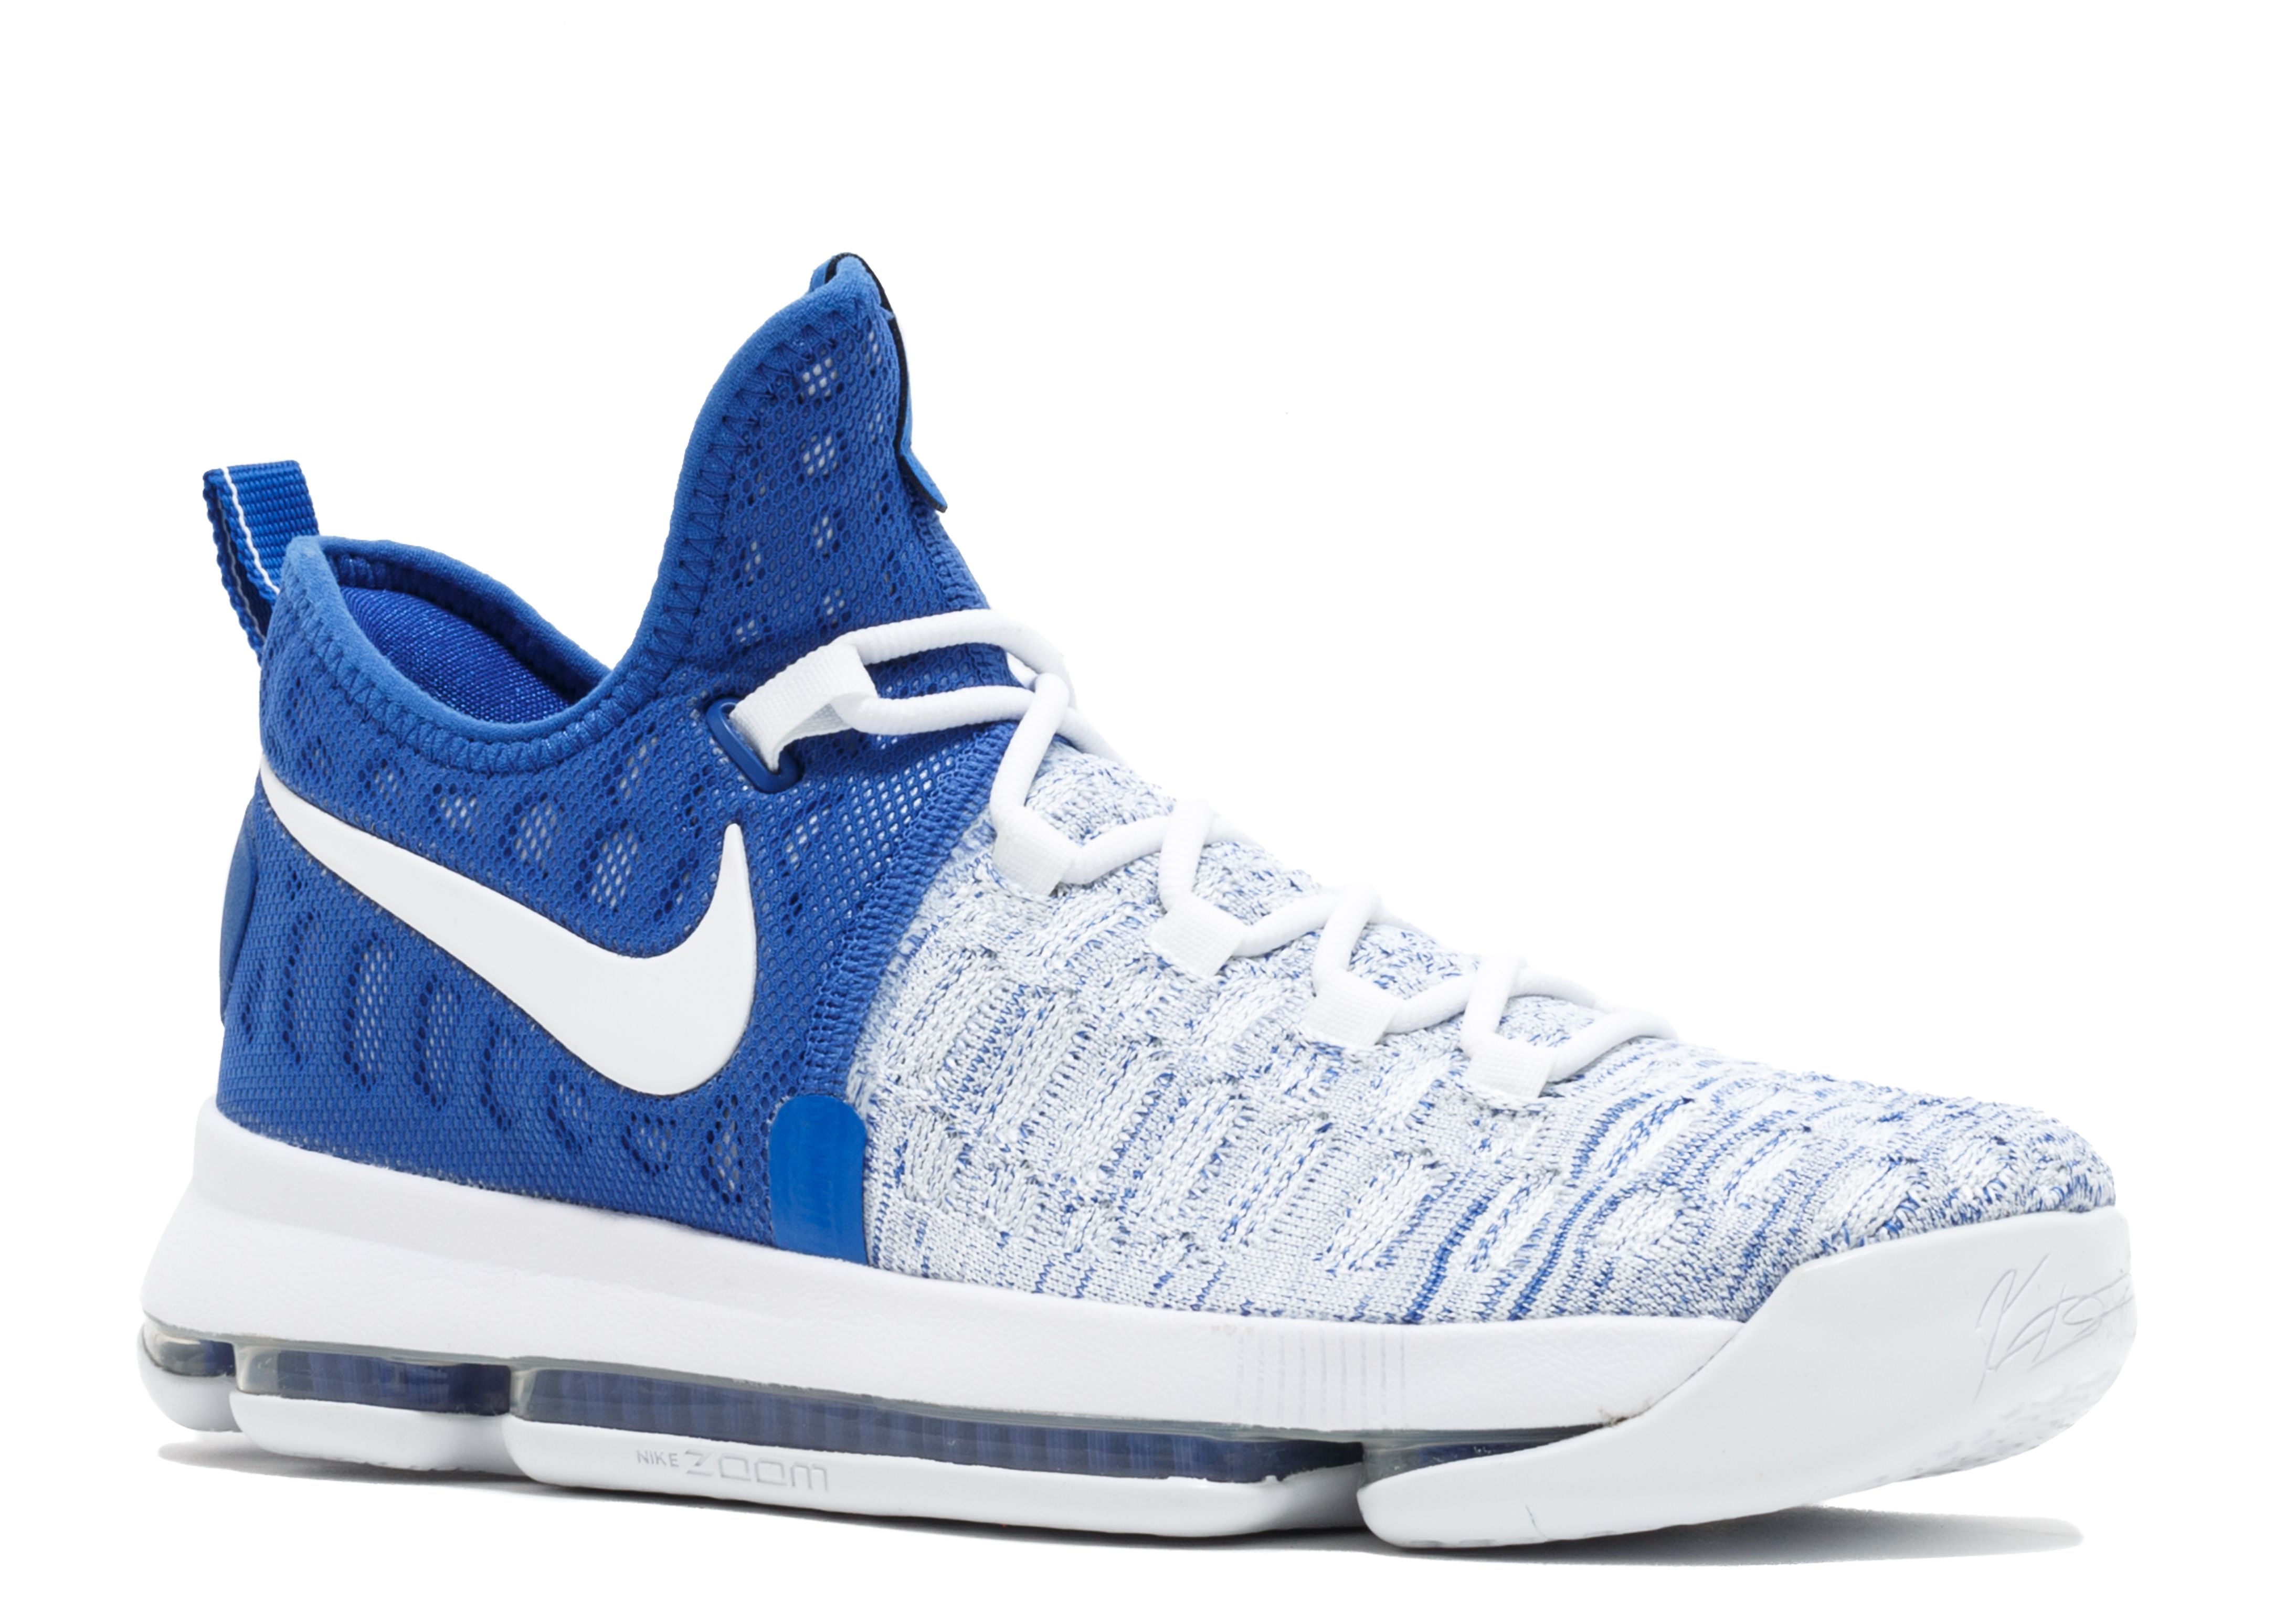 kd shoes white and blue